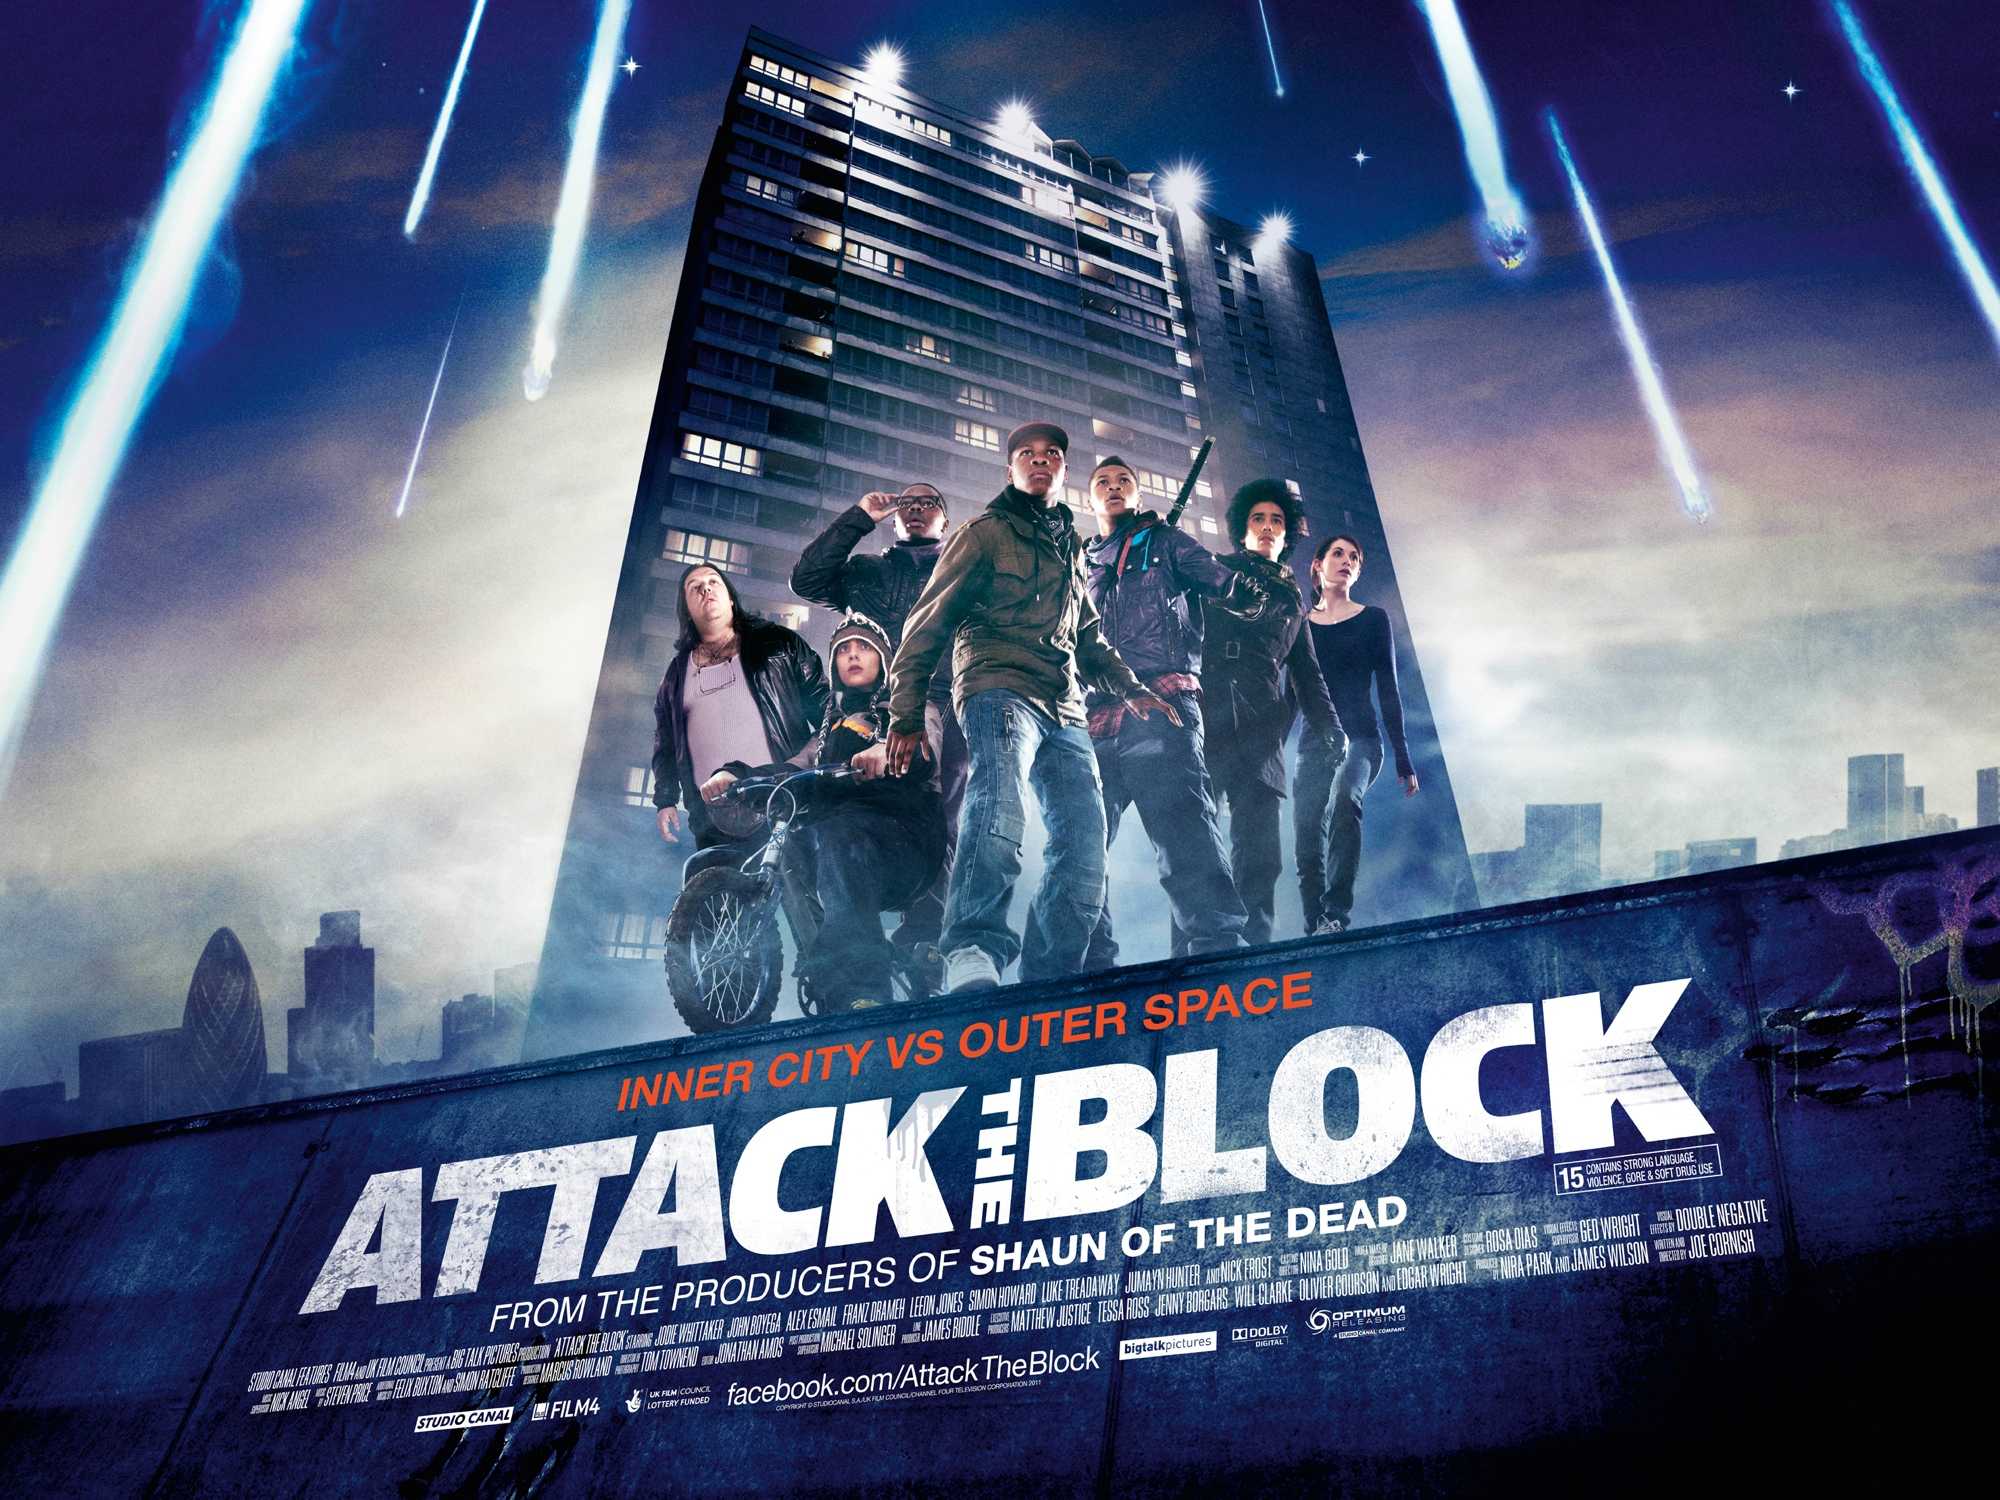 Early Review: “Attack the Block” mixes comedy, action and sci-fi seamlessly